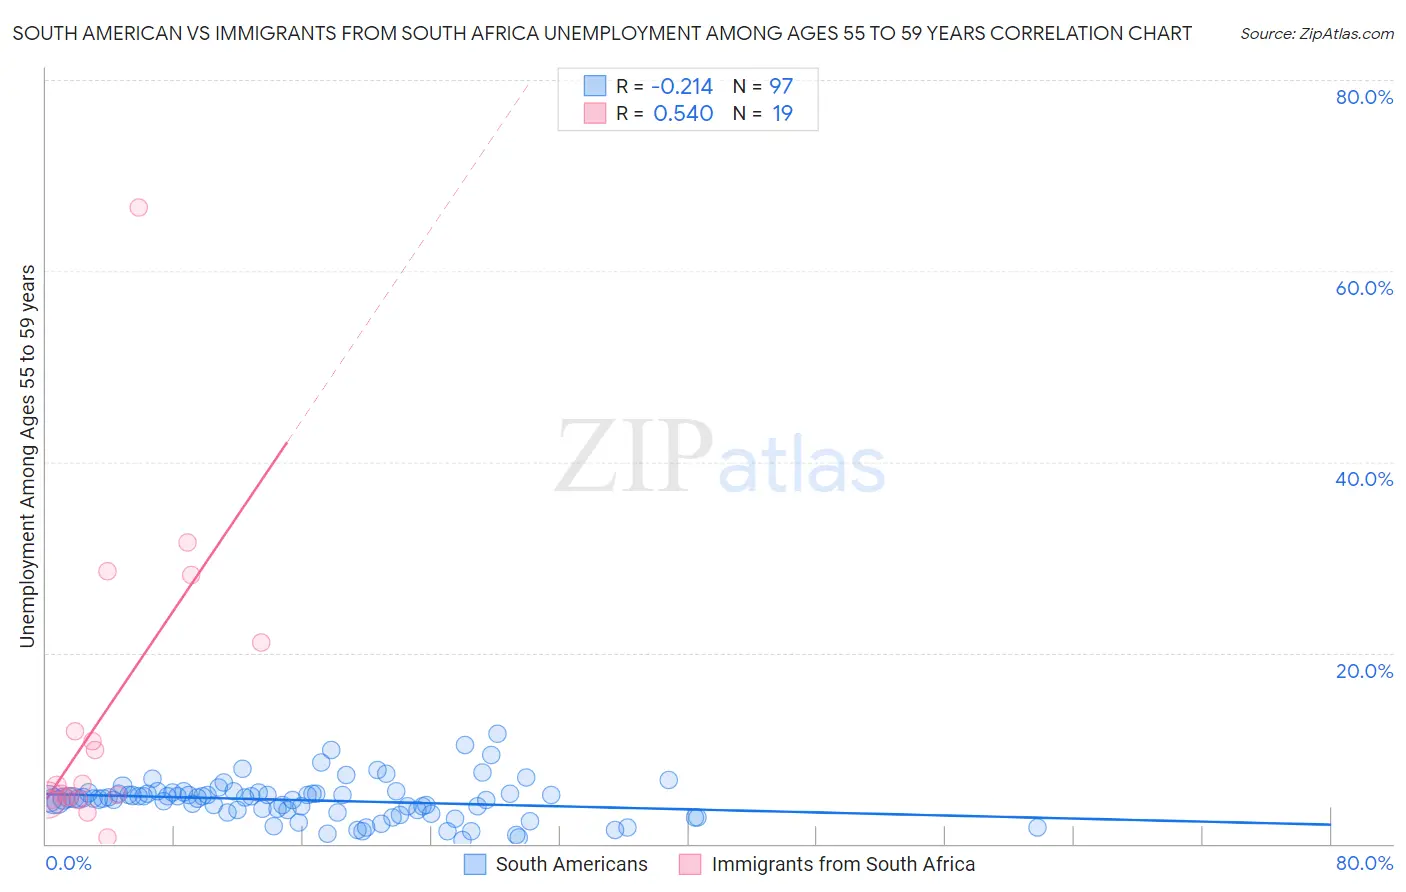 South American vs Immigrants from South Africa Unemployment Among Ages 55 to 59 years